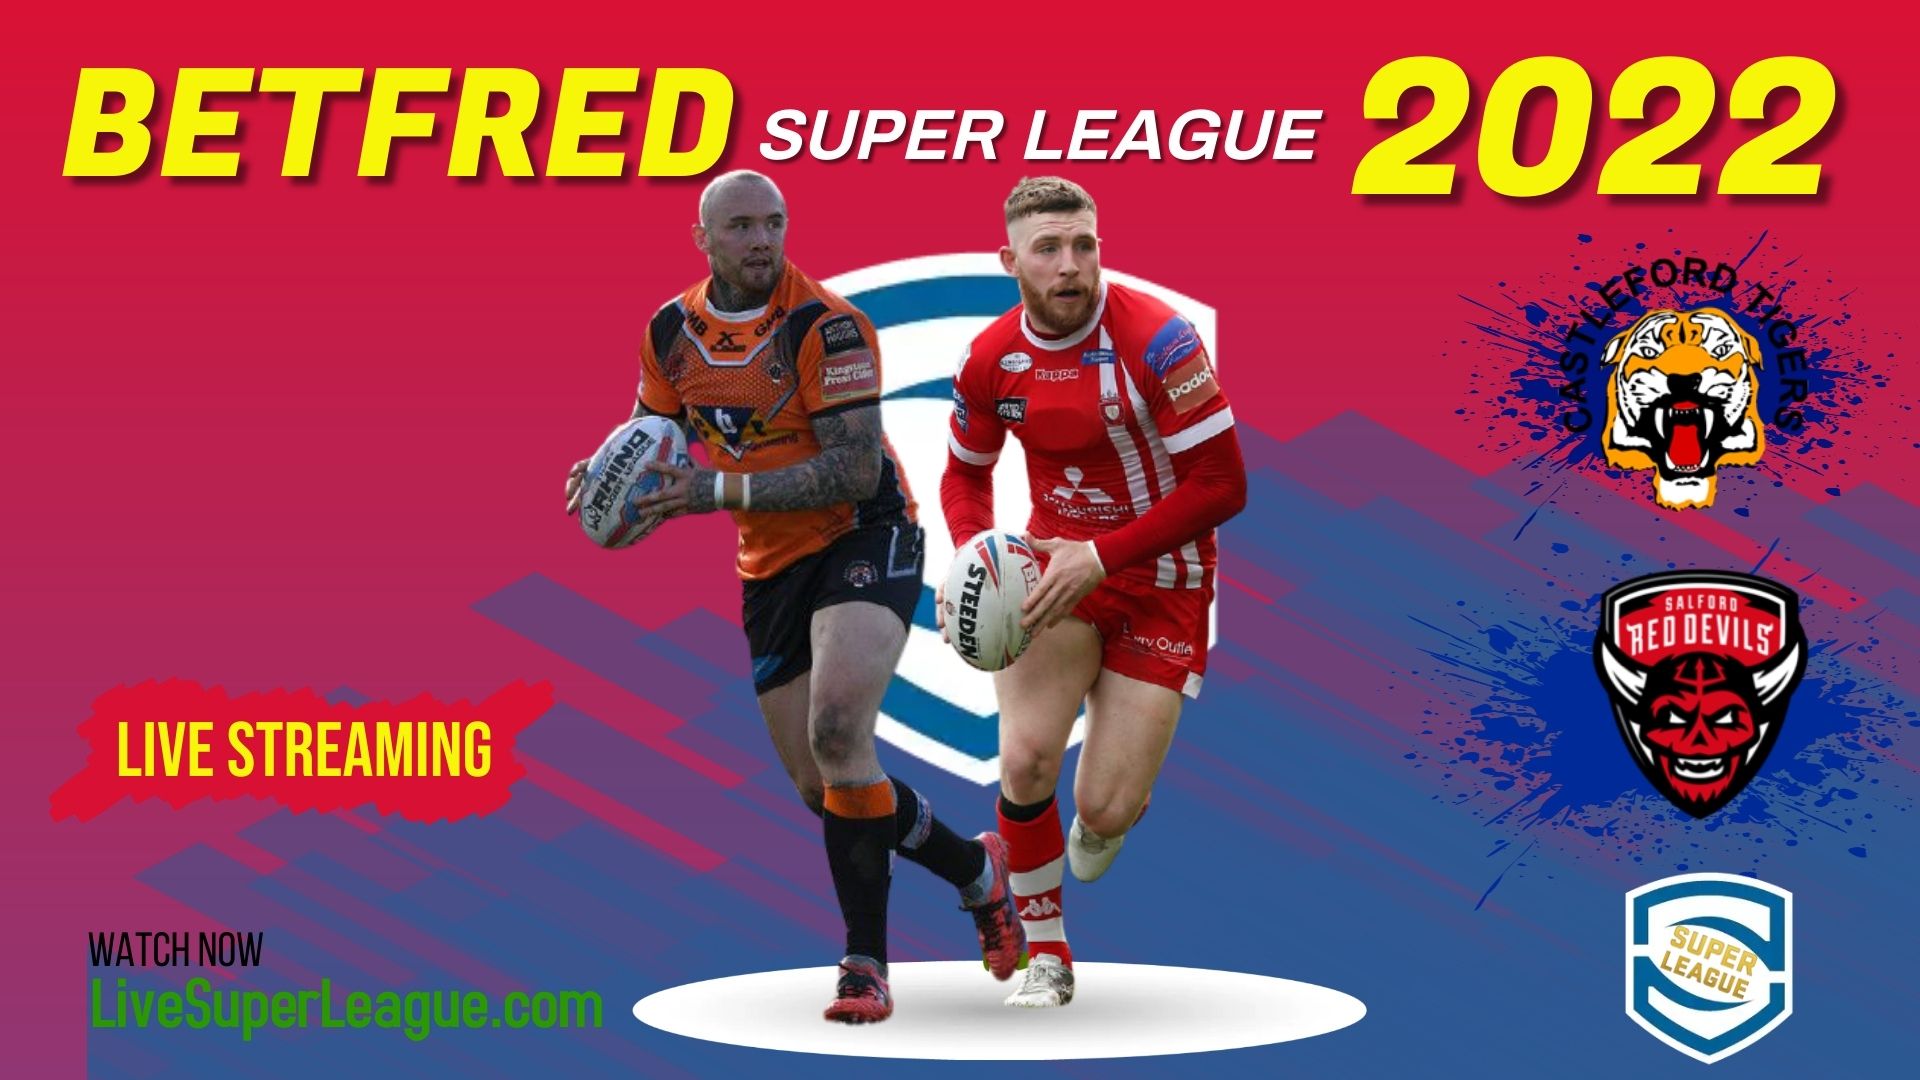 Castleford Tigers Vs Salford Red Devils RD 1 Live Stream 2022 | Full Match Replay